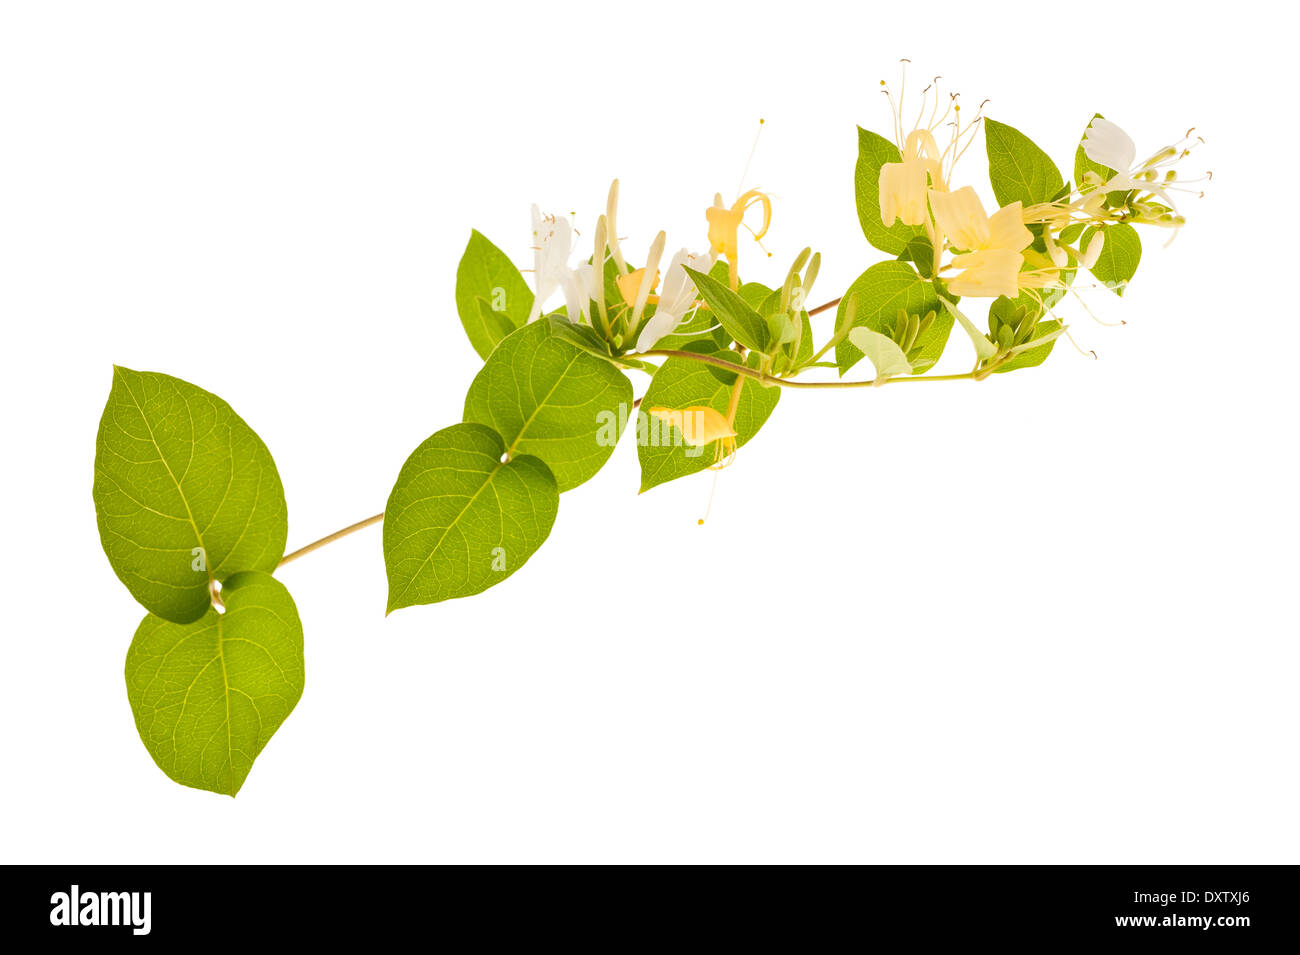 honeysuckle Sprig with white flowers and green leaves isolated on white background Stock Photo